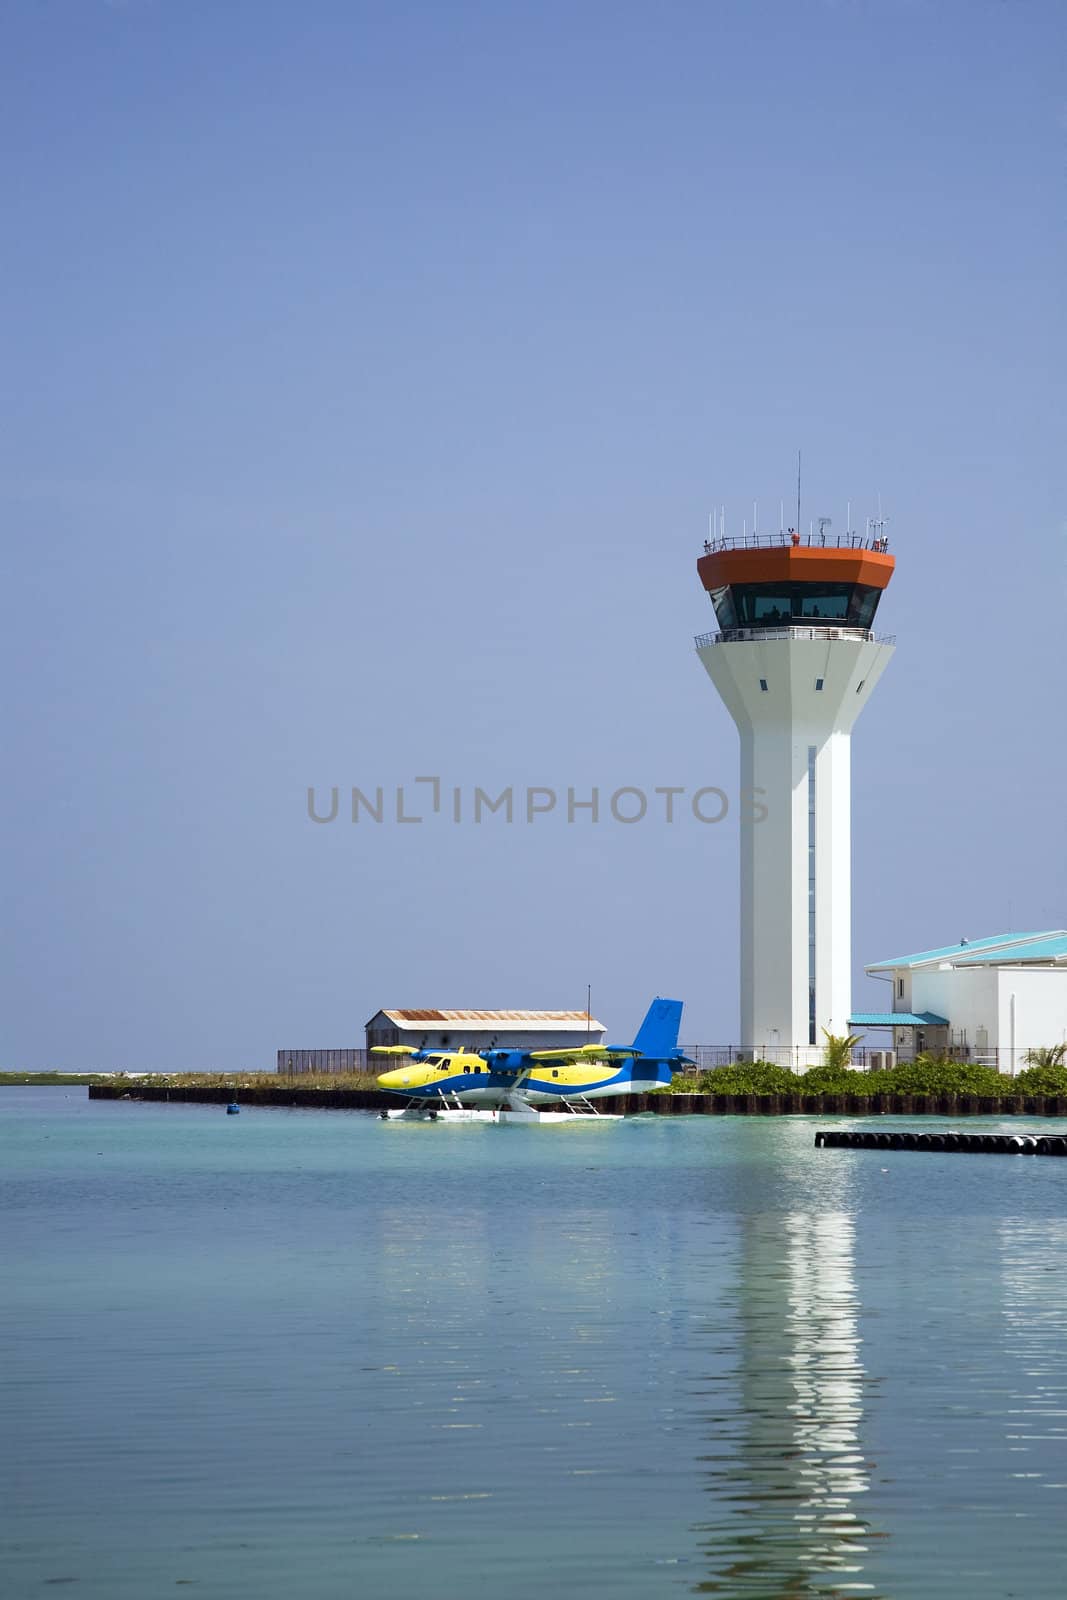 A sea plane lands on the water with the air traffic control tower in the background.